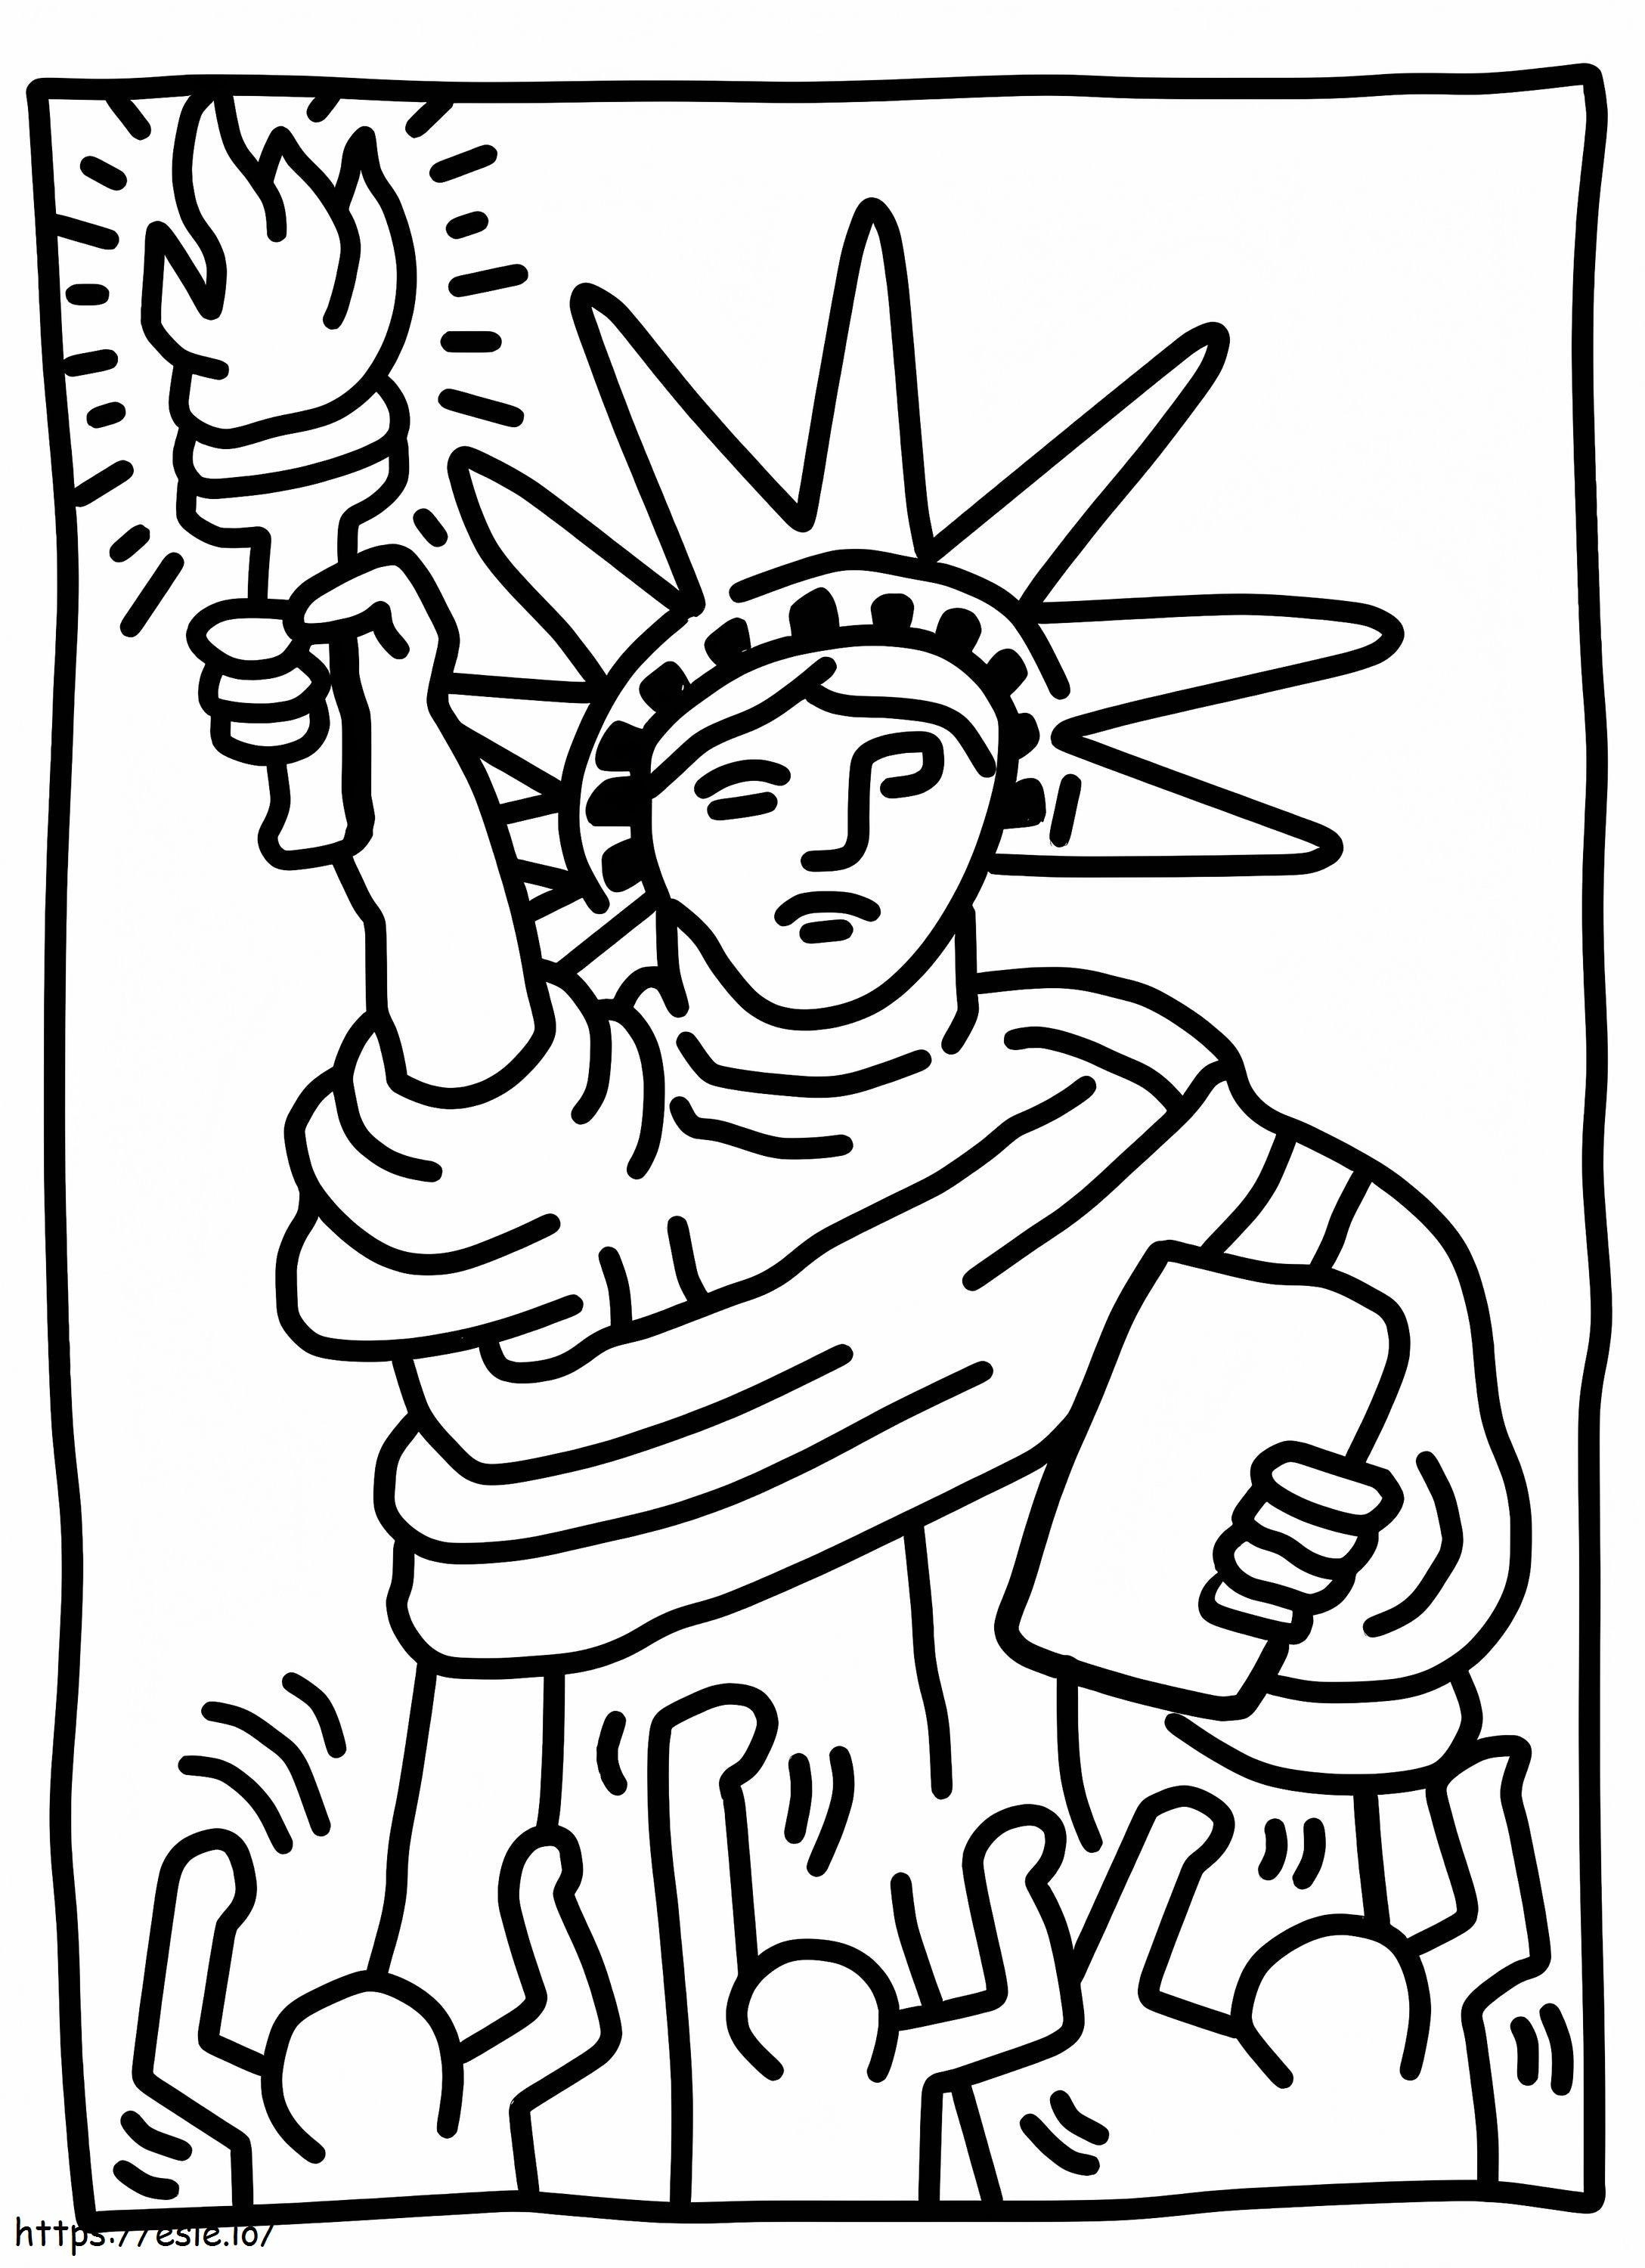 1598401596 Statue Of Liberty By Keith Haring coloring page